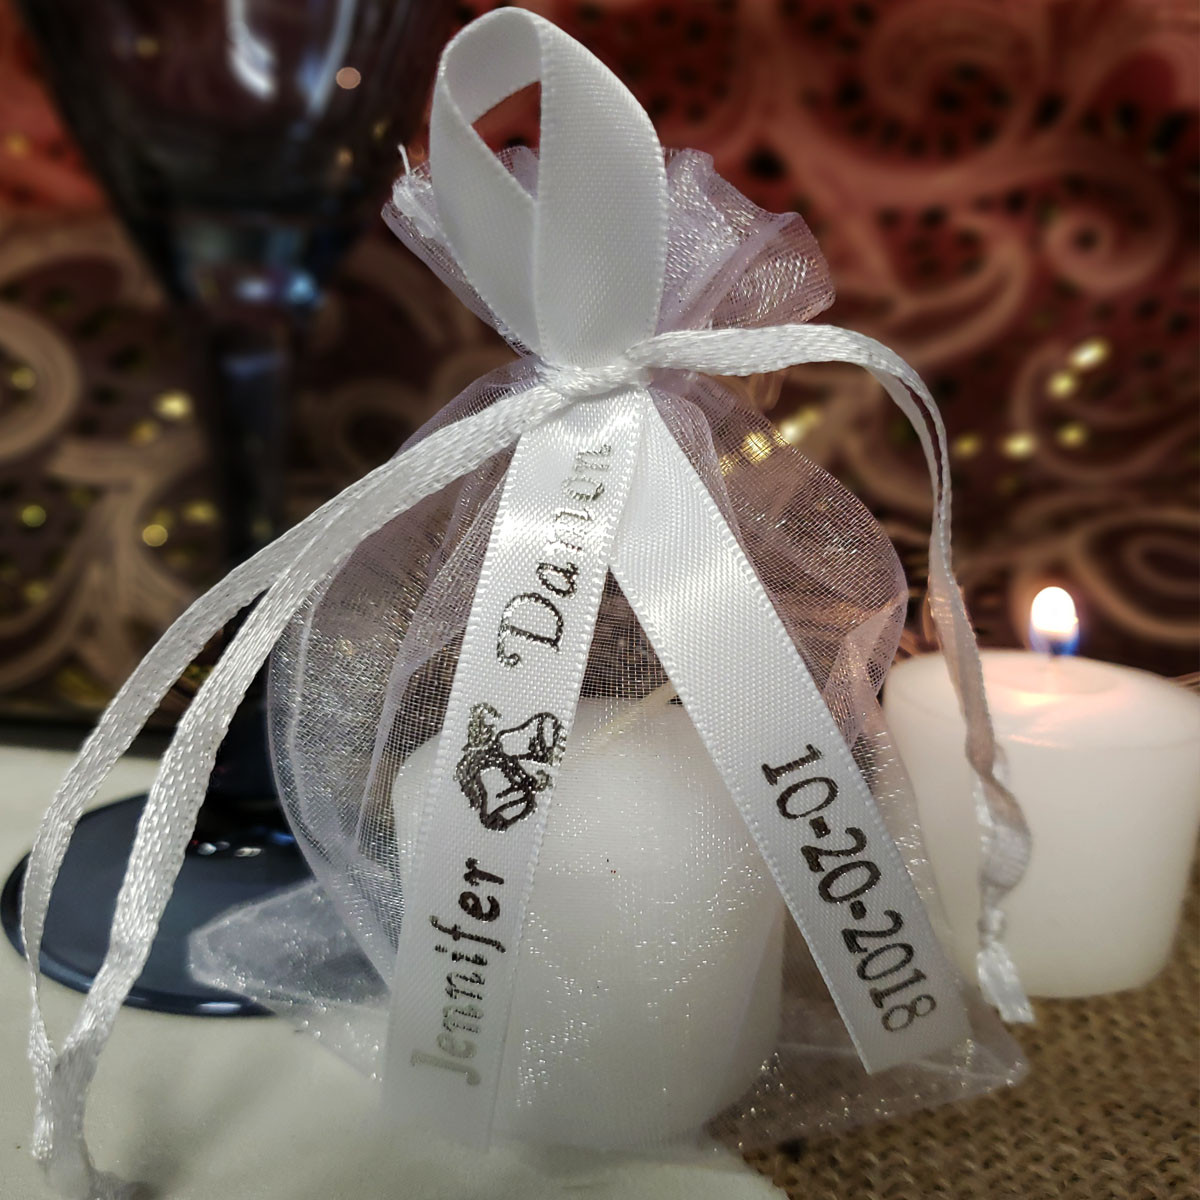 Personalized Ribbon For Wedding Favors
 Votive Candle Personalized Favor Ribbon bo Kit DIY